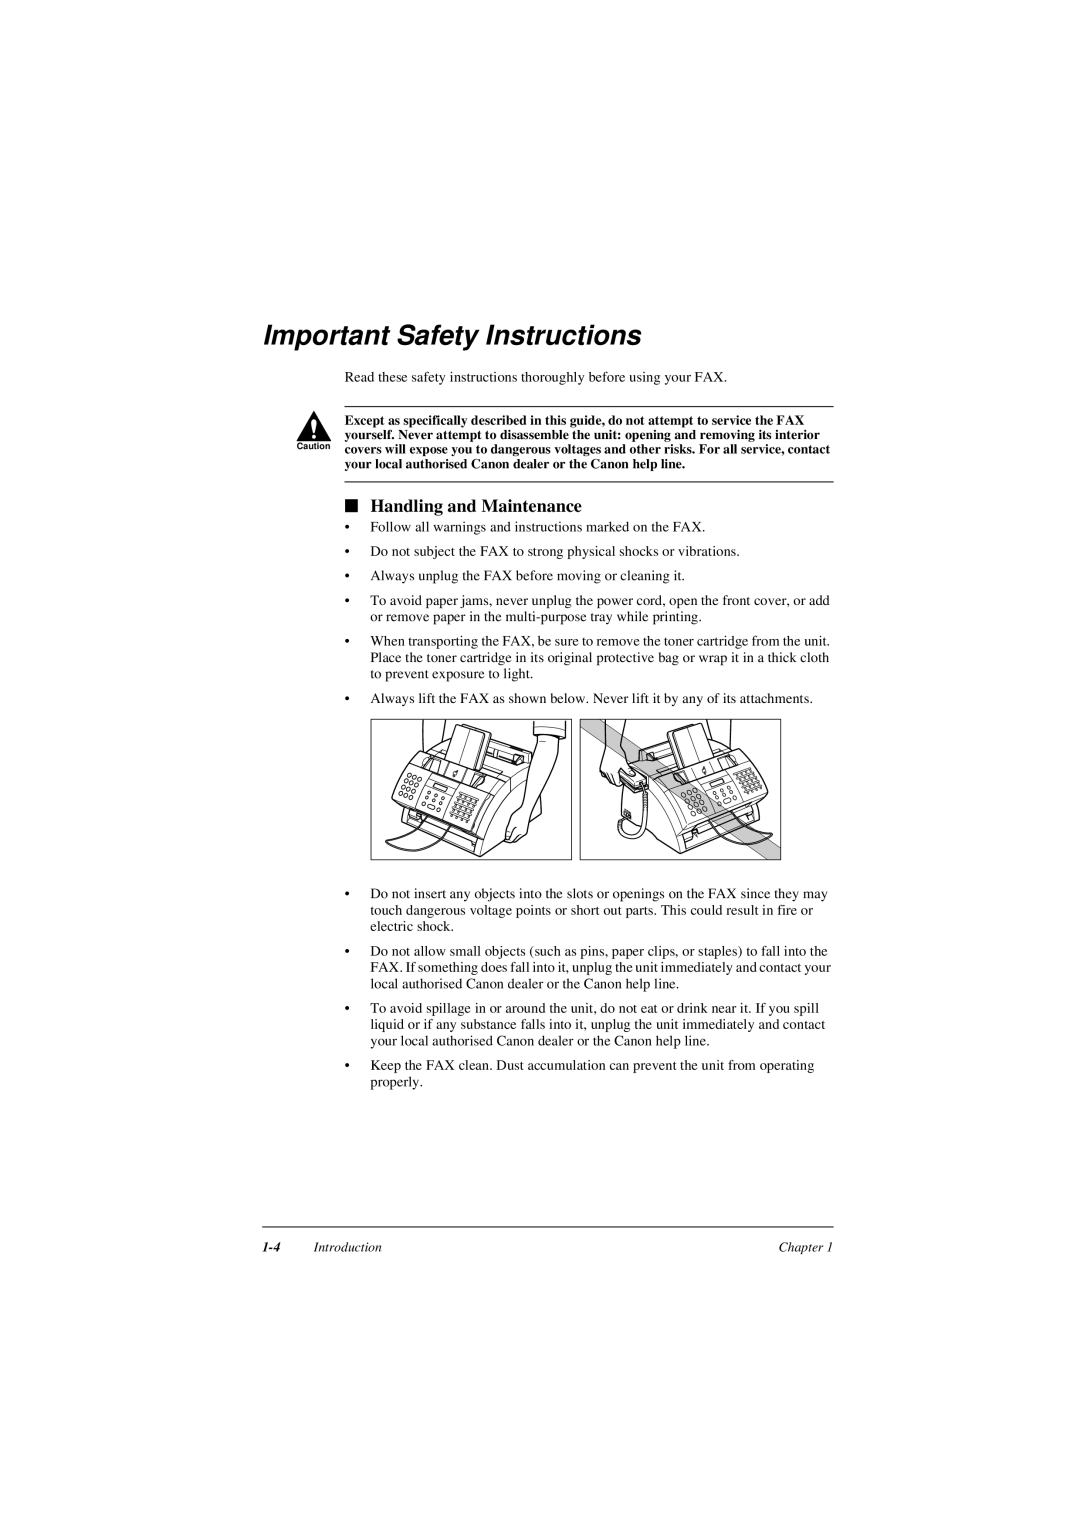 Canon L290, L240 manual Important Safety Instructions, Handling and Maintenance 